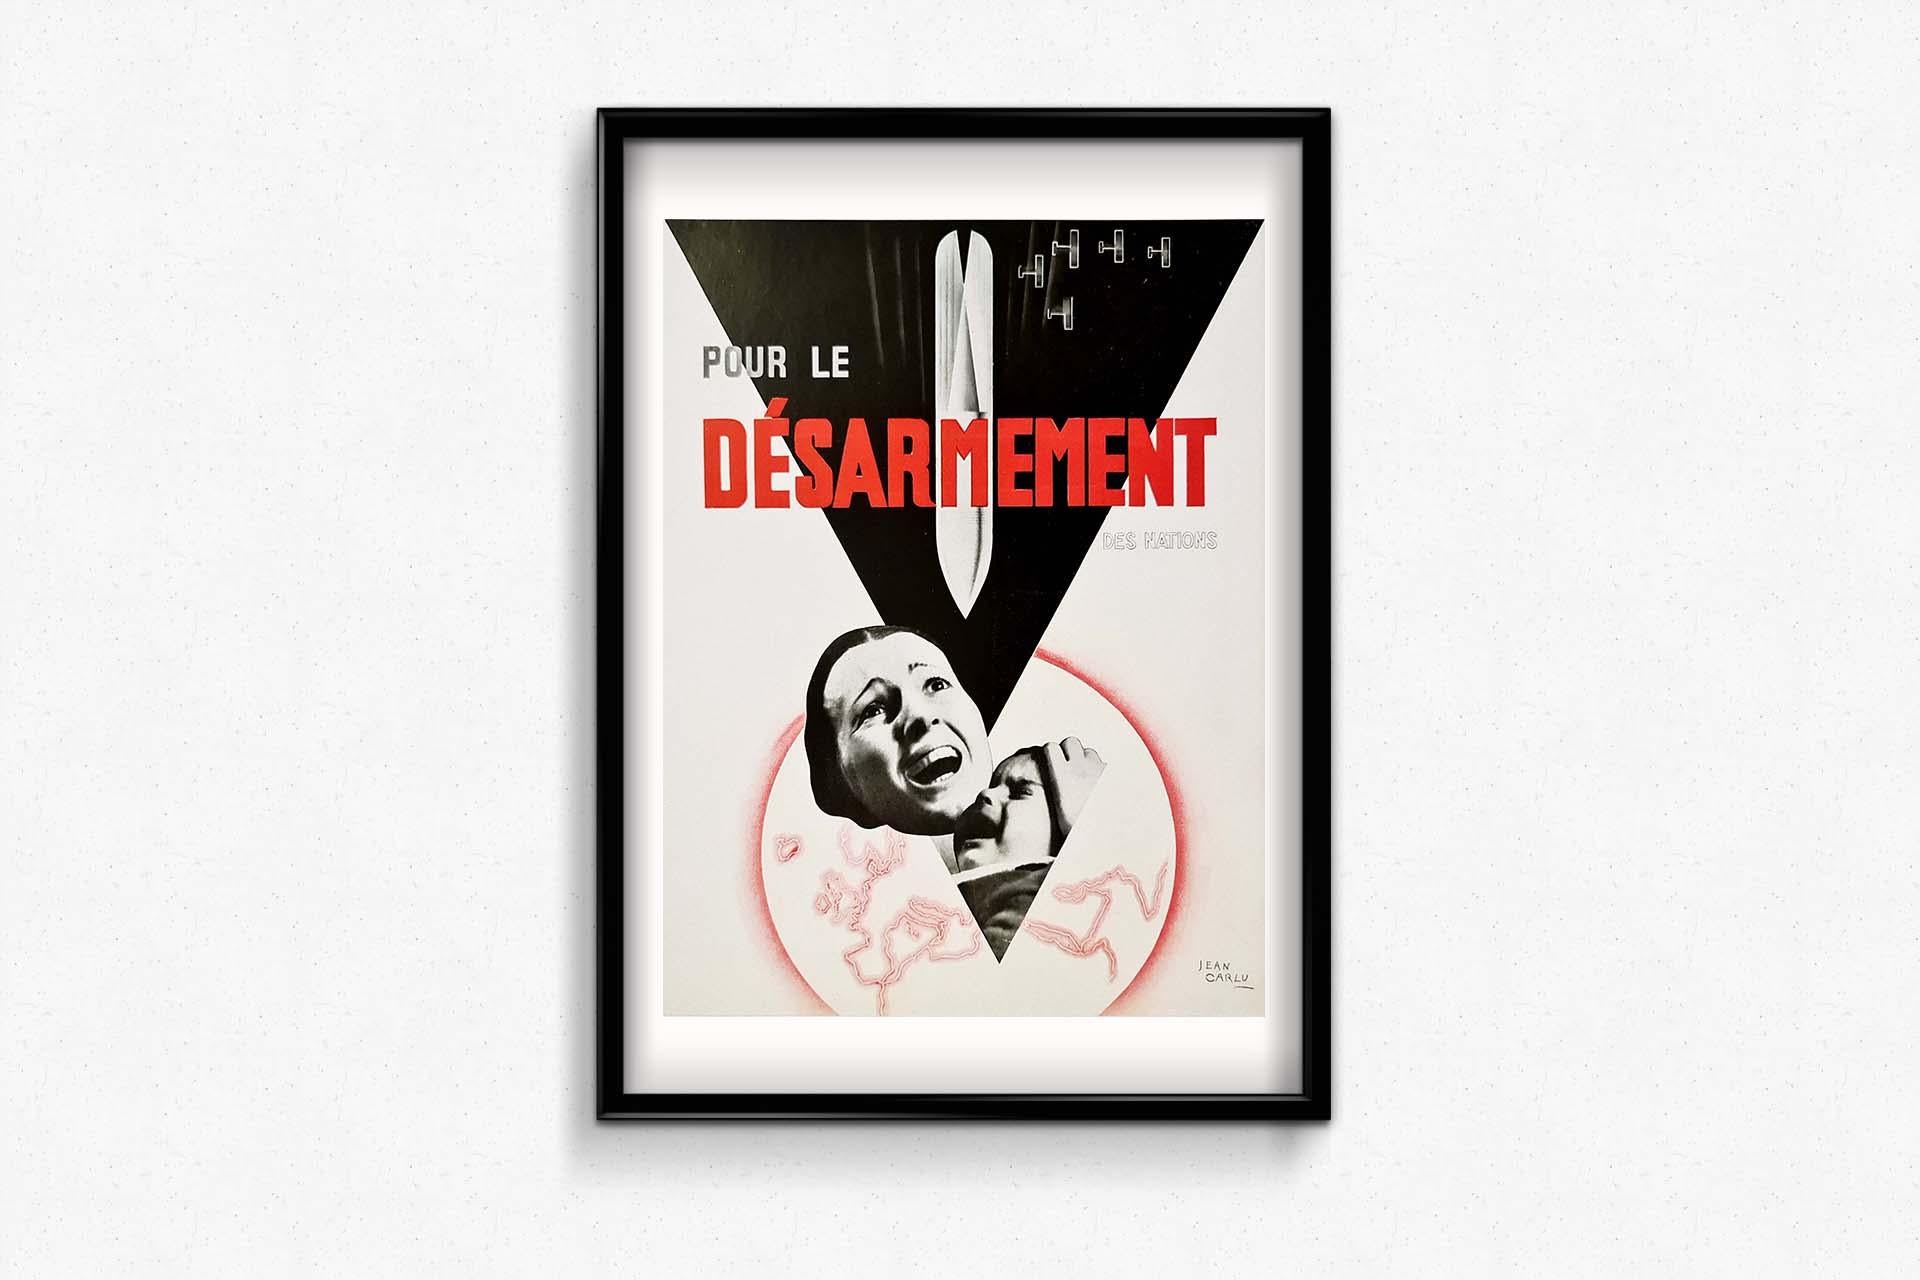 1932 Original Art Deco Poster by Jean Carlu for the disarmament of all nations For Sale 1